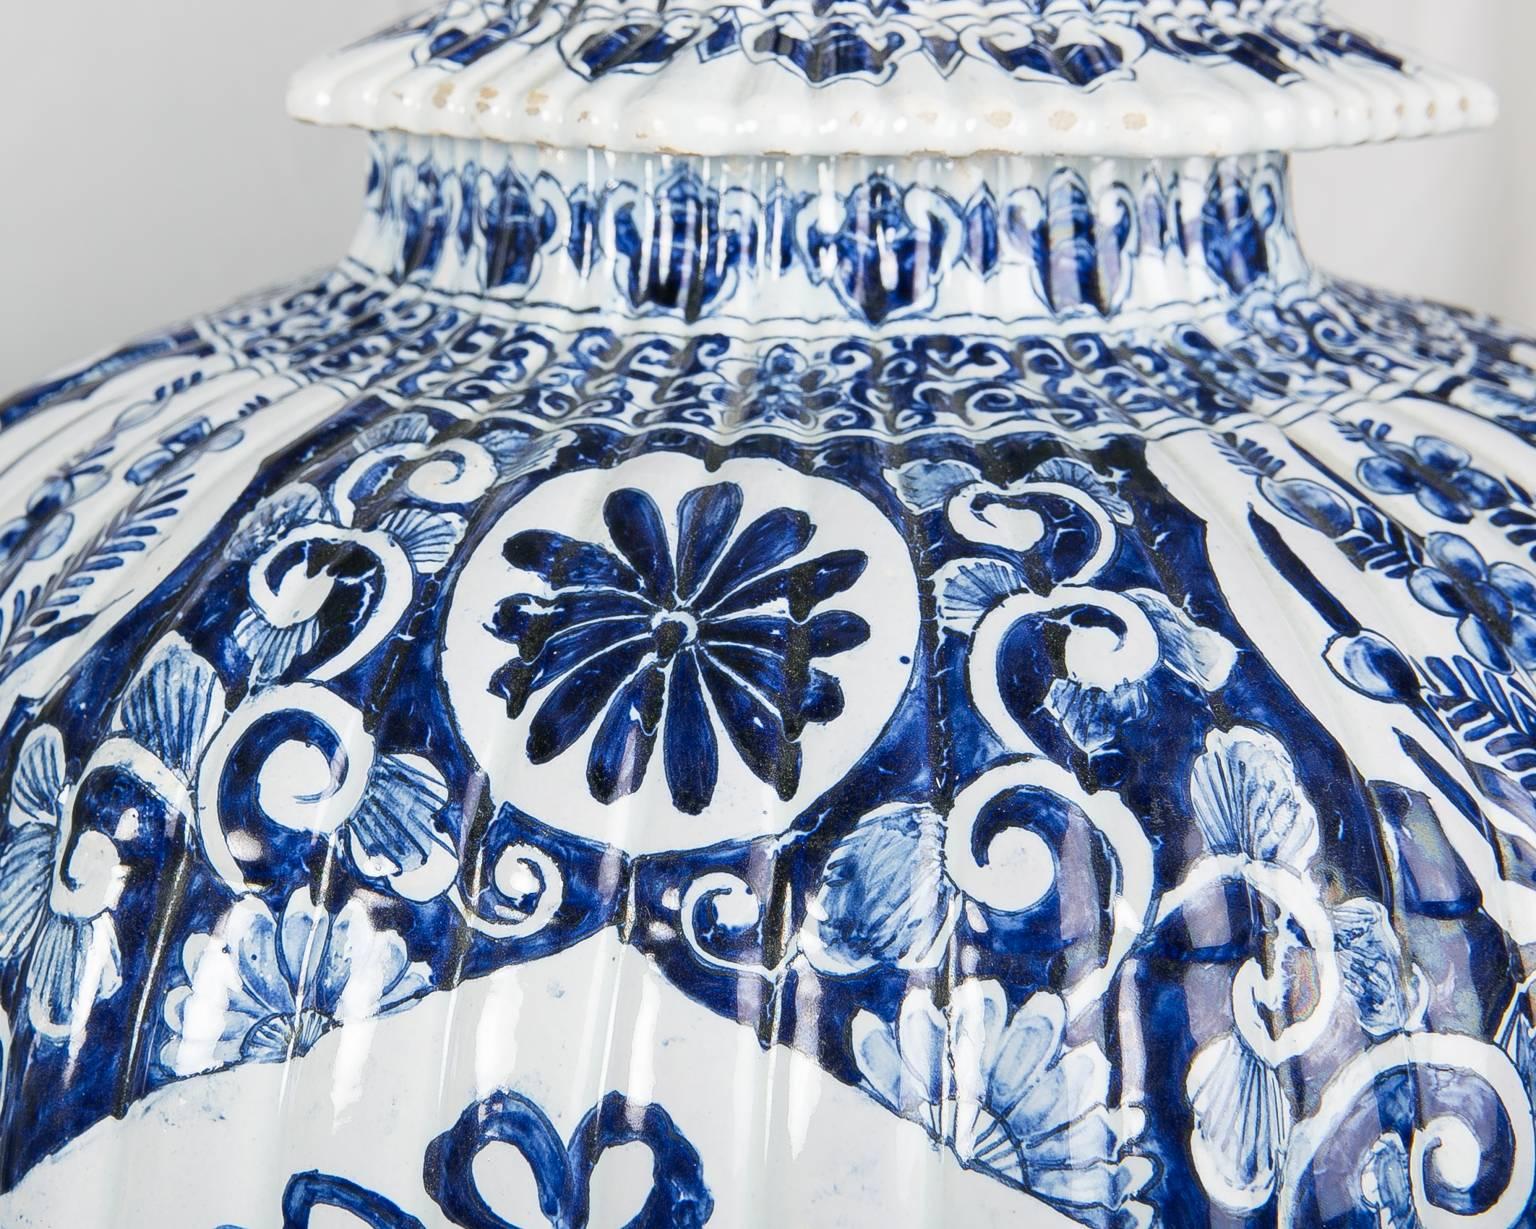 20th Century Massive Pair Blue and White Delft Vases Antique Made Late 19th-Early 20th C